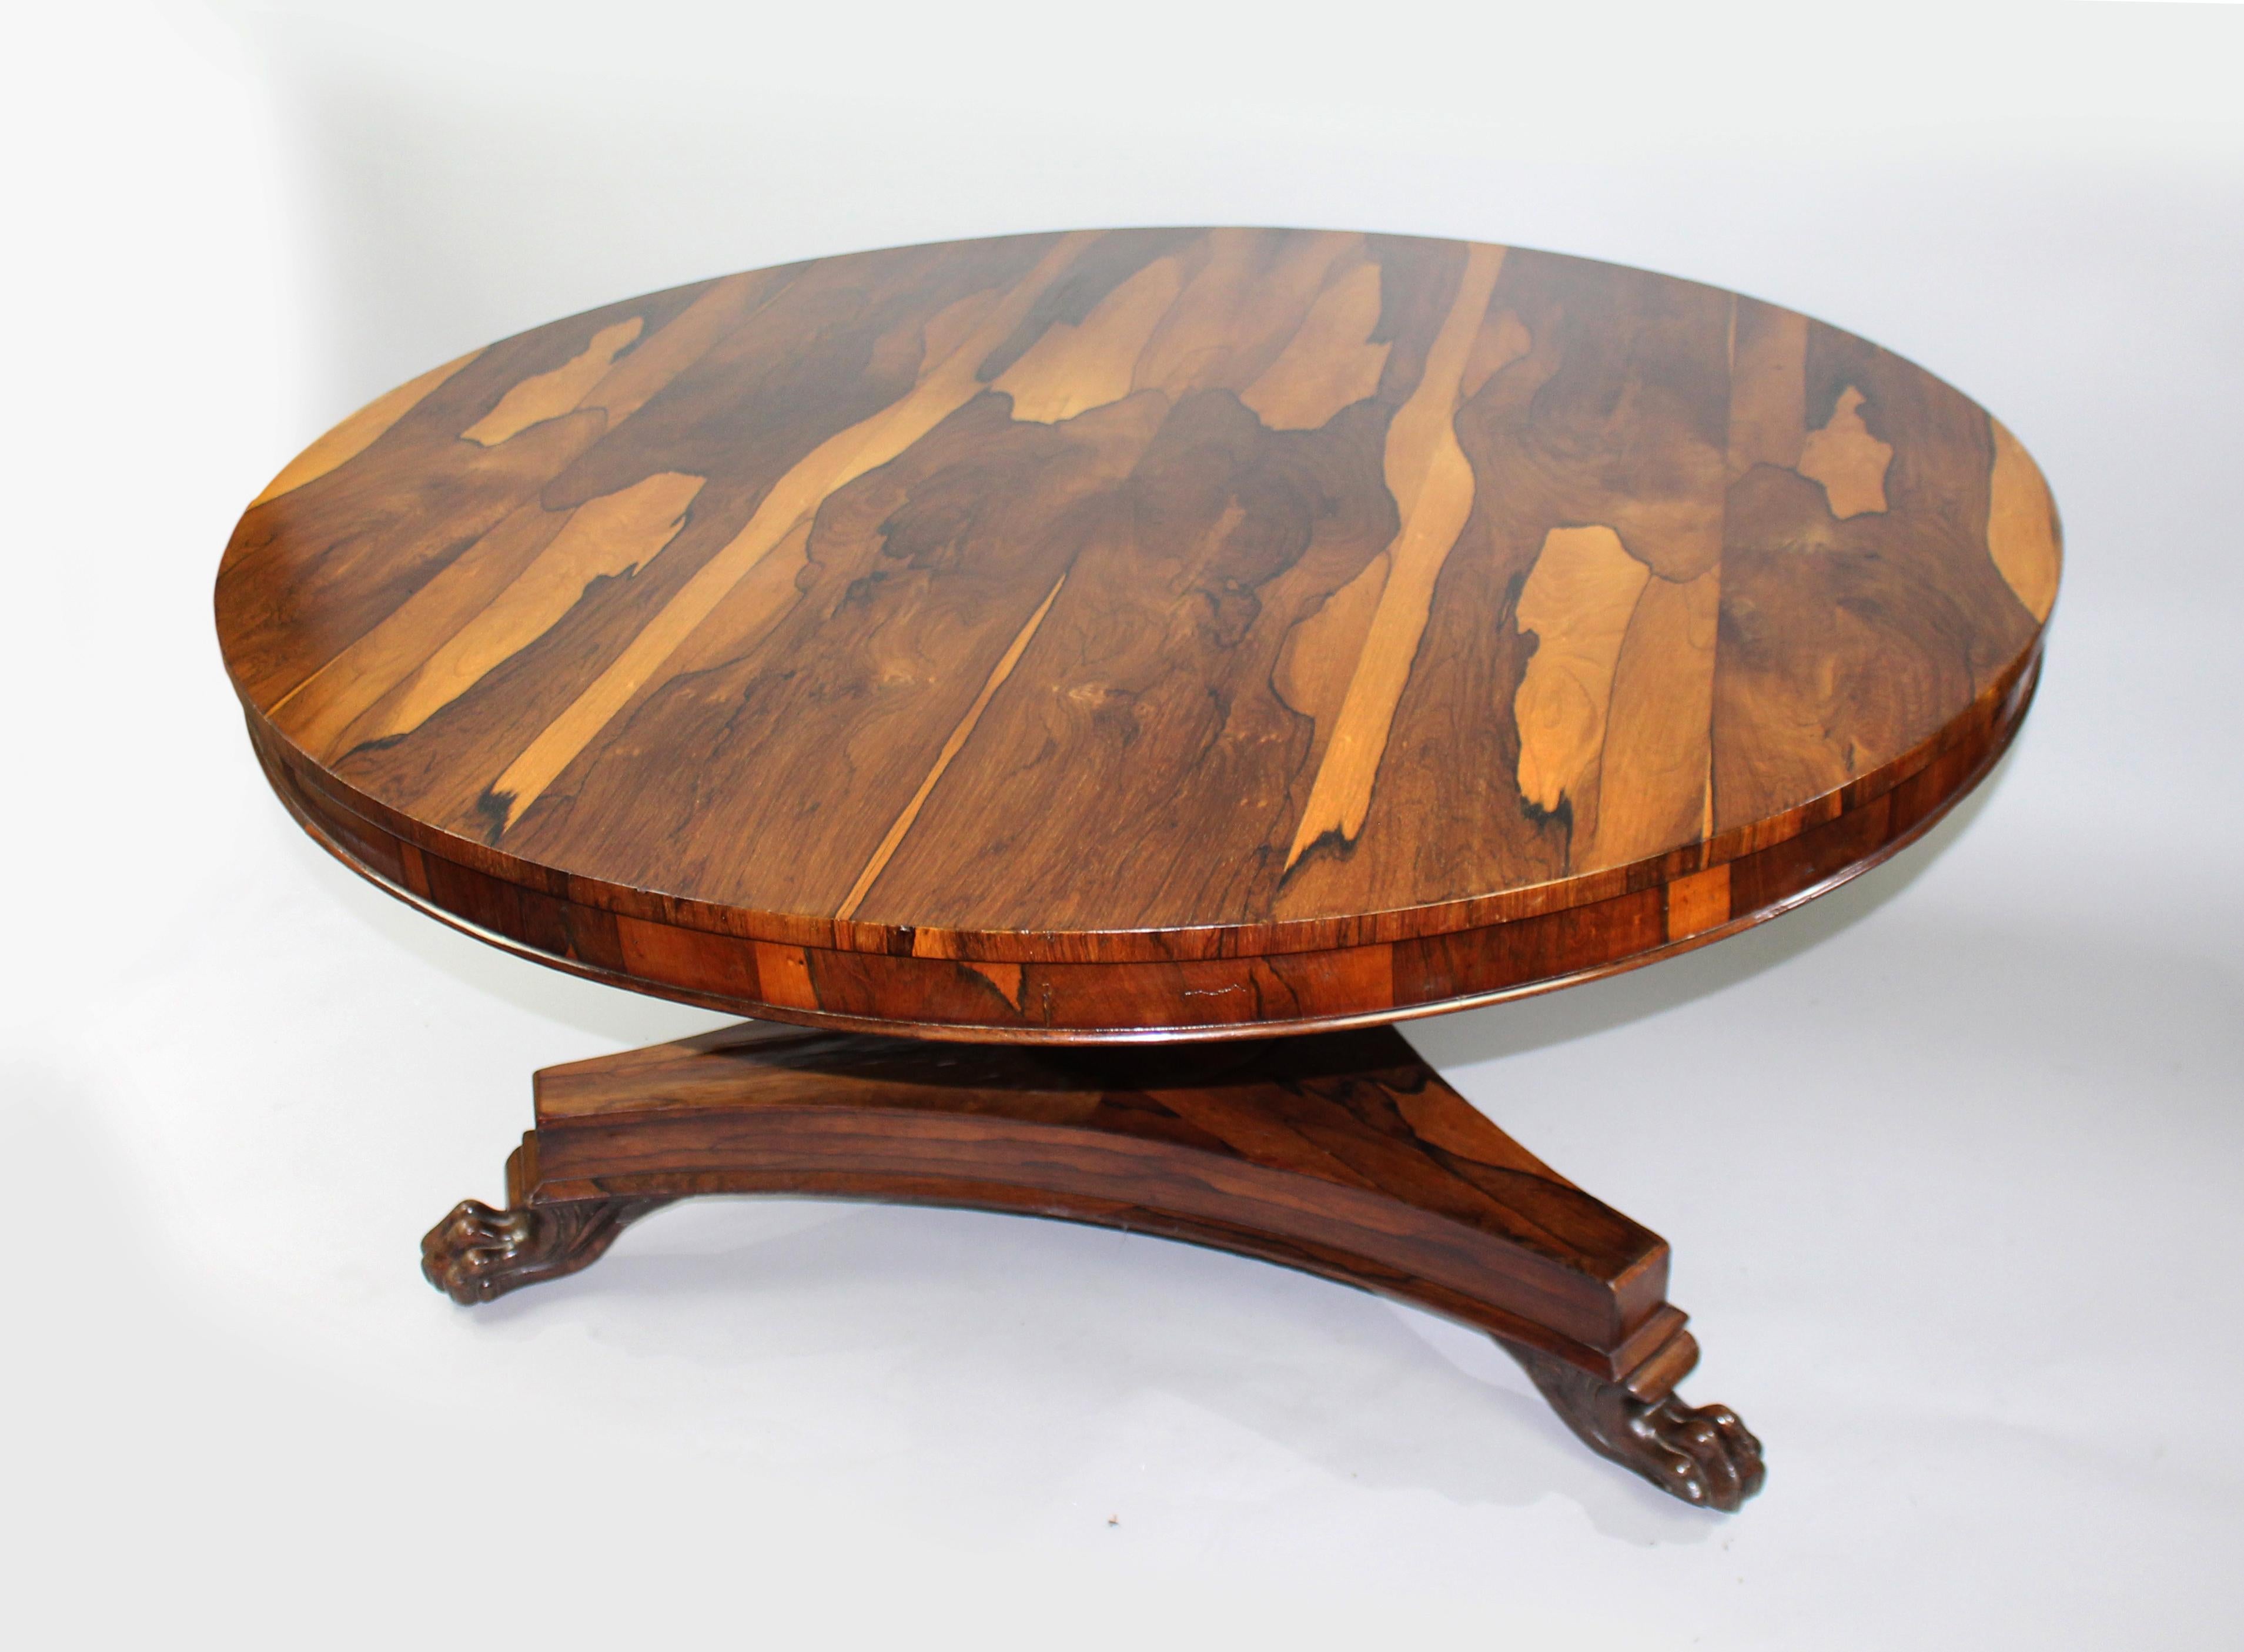 Centre table

Period 
circa 1830, English

Wood 
Sabina wood

Condition 
Offered in good condition. A few small marks to the finish commensurate with age, and some slight lifting to the veneer. Very attractive patina, a lovely quality